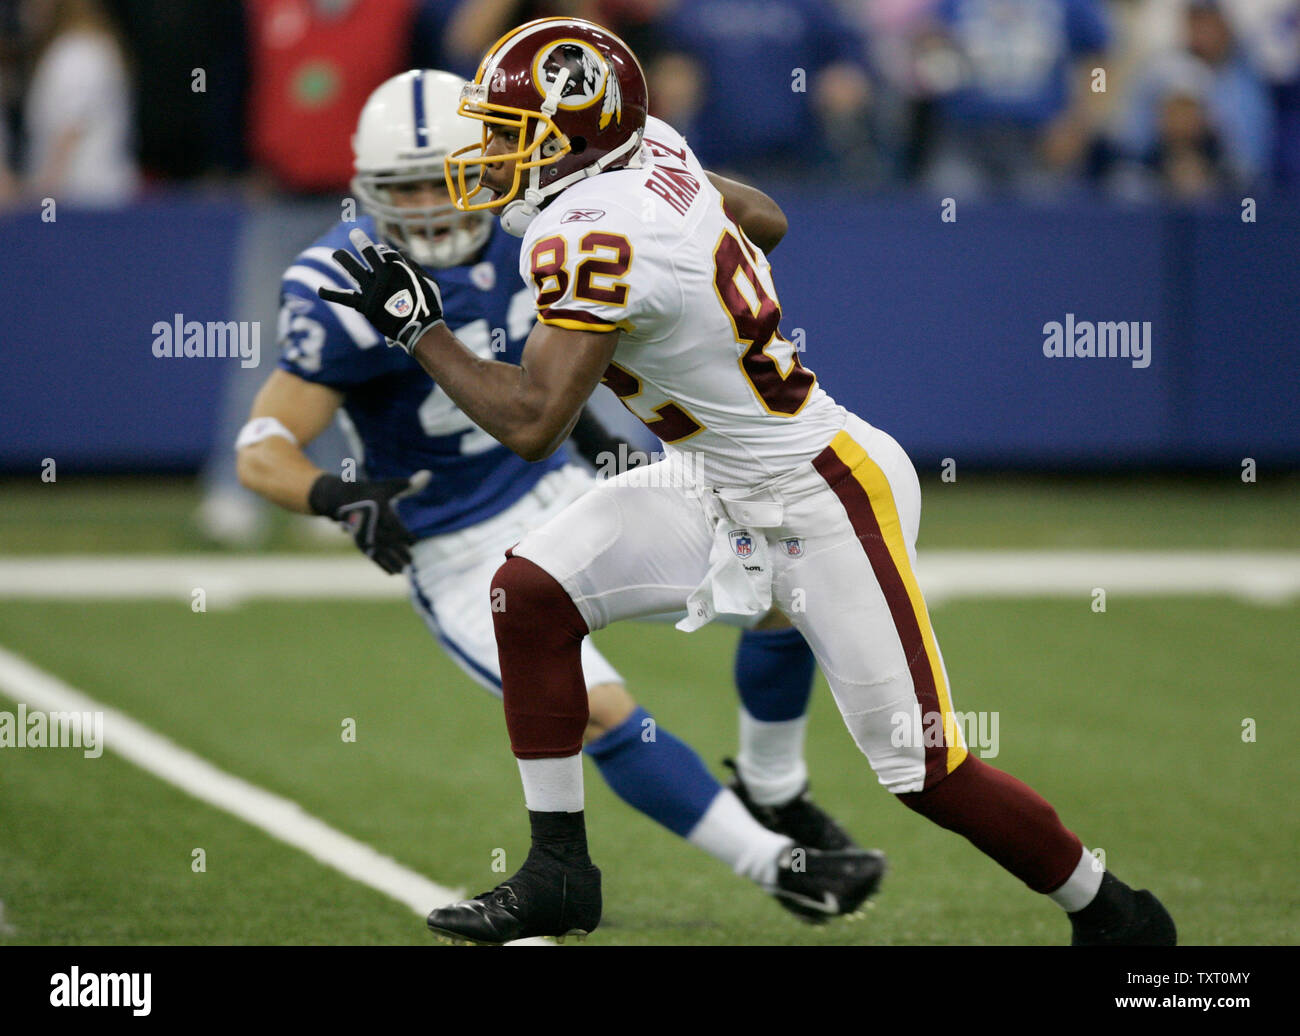 Washington Redskins punt returner Antwaan Randle El (82) breaks past Indianapolis Colts defensive back Matt Giordano (43) for a touchdown at the RCA Dome in Indianapolis on October 22, 2006. (UPI Photo/Mark Cowan) Stock Photo